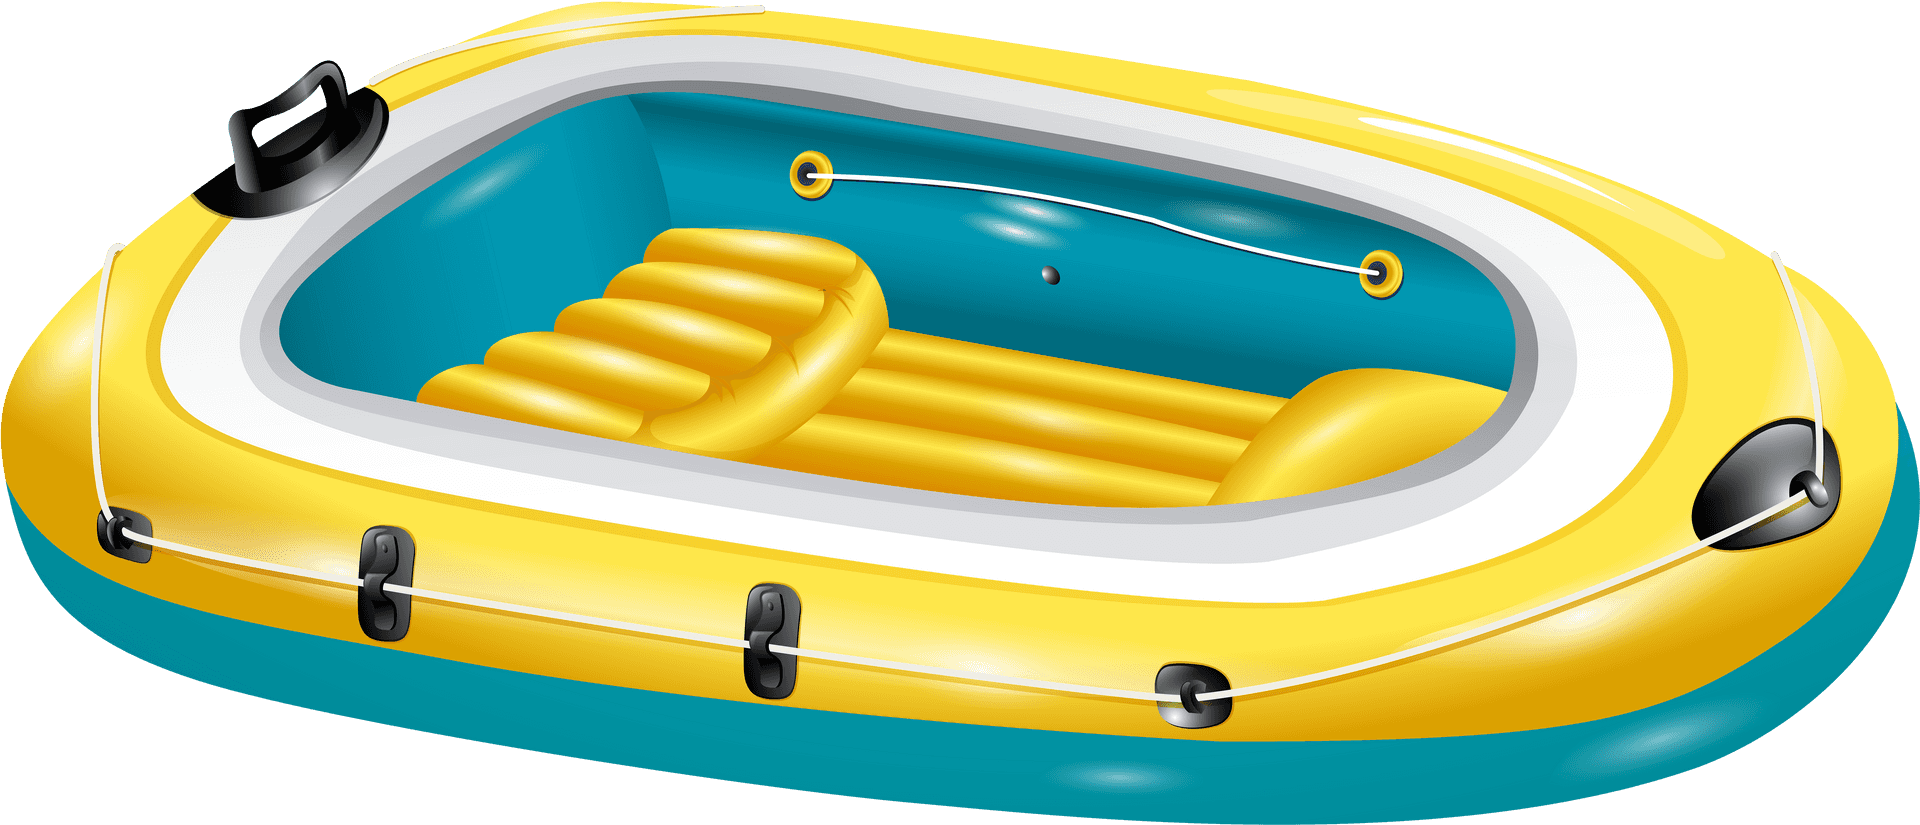 Inflatable Yellow Raft Illustration PNG